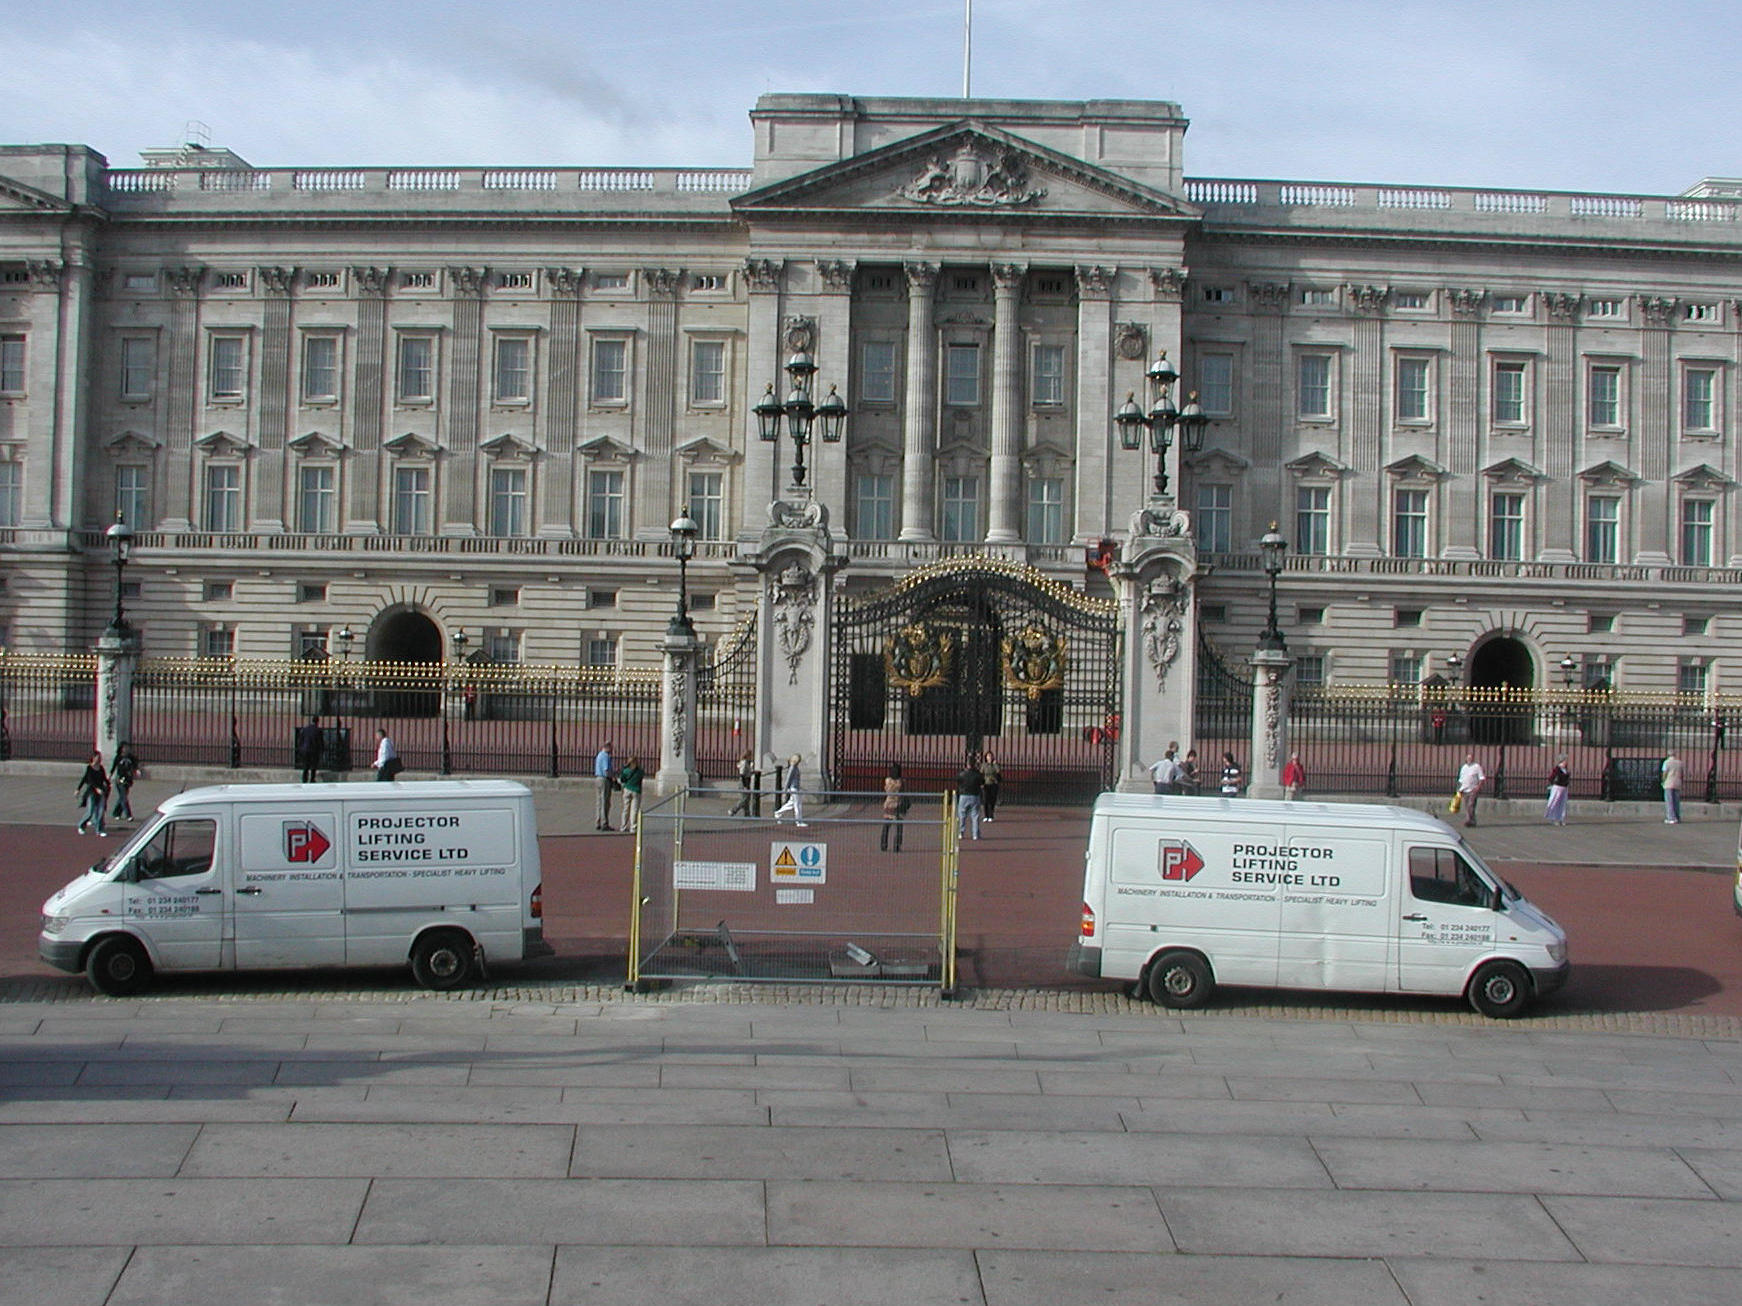 Projector Lifting Service vans outside Buckingham Palace